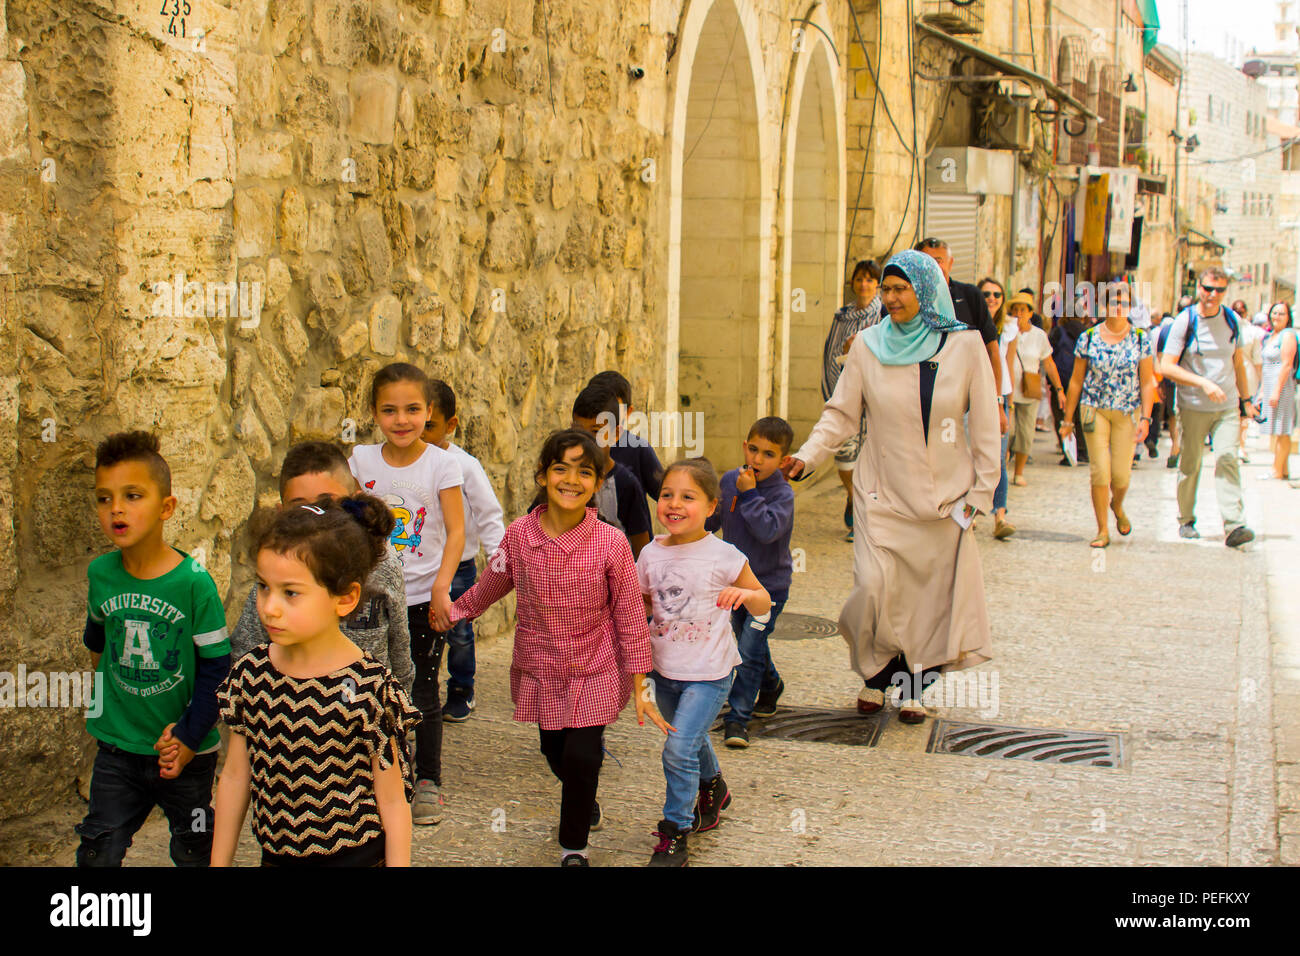 10 May 2018 A group of young children and their female Muslam guardian in traditional modest dress walking in the old city of Jerusalem Israel Stock Photo